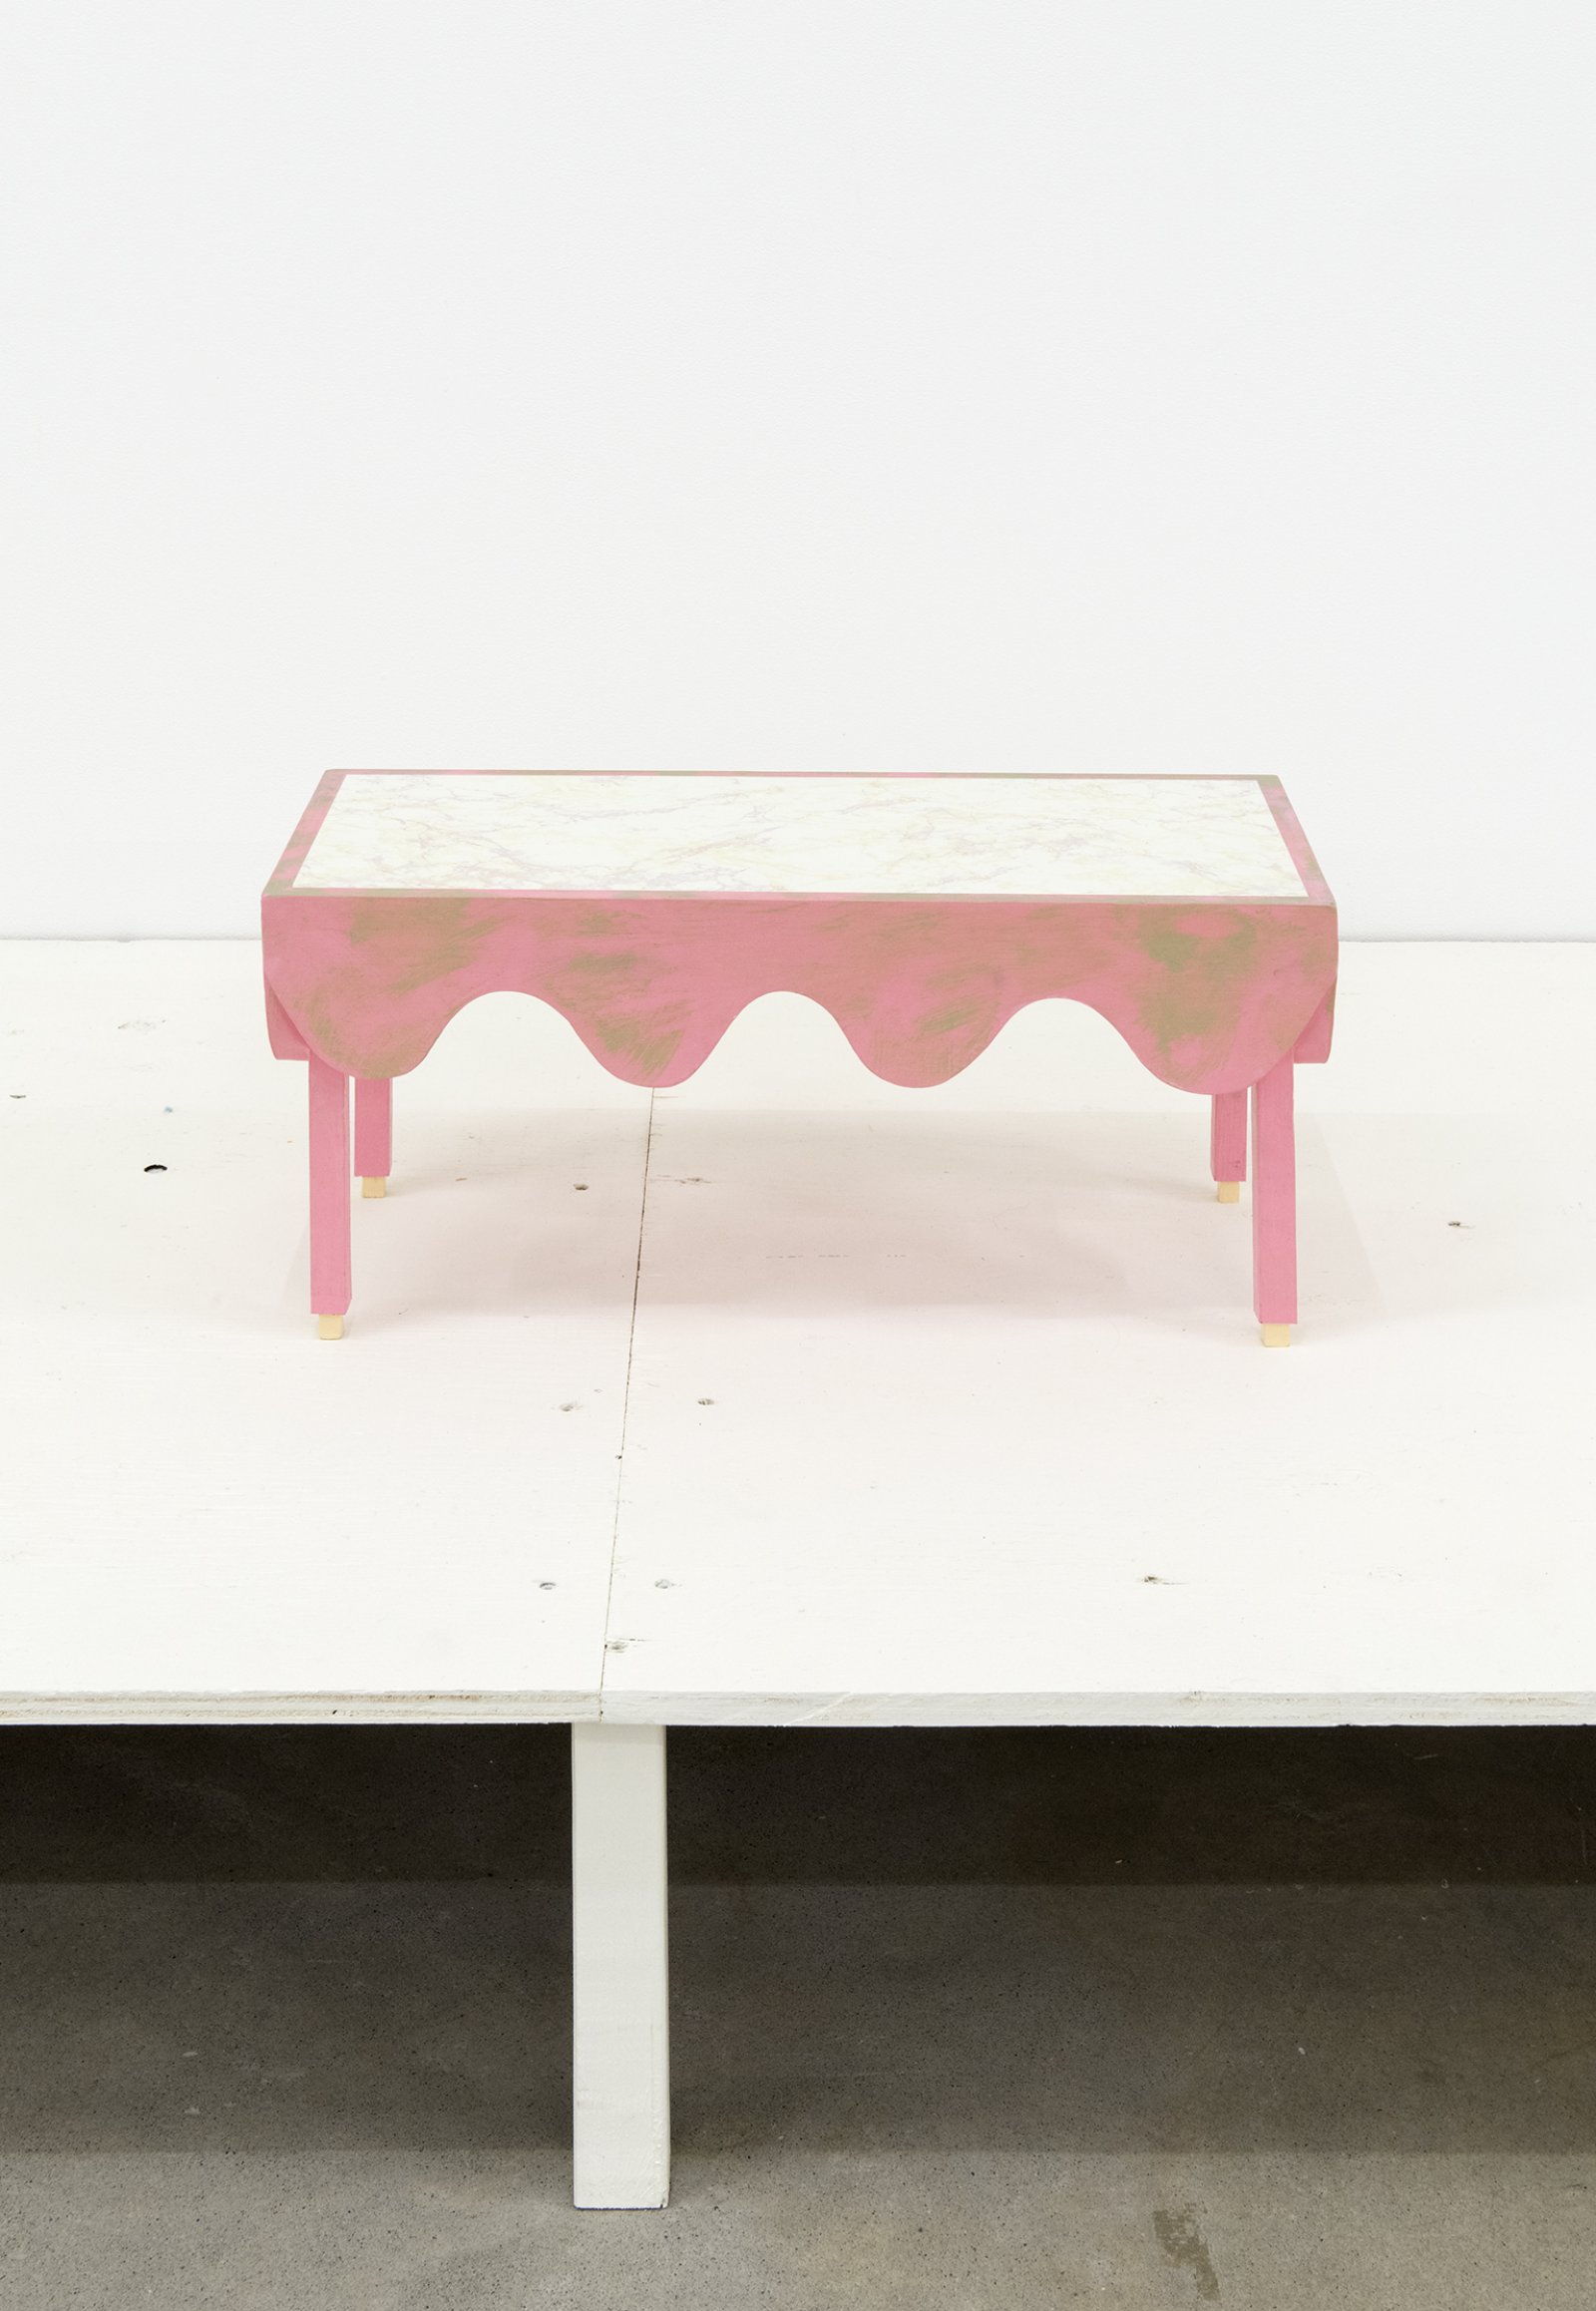 Gareth Moore, WP-03 sl, 2013, wood, paint, shelf liner, 10 x 21 x 9 in. (26 x 53 x 23 cm)   by Ashes Withyman